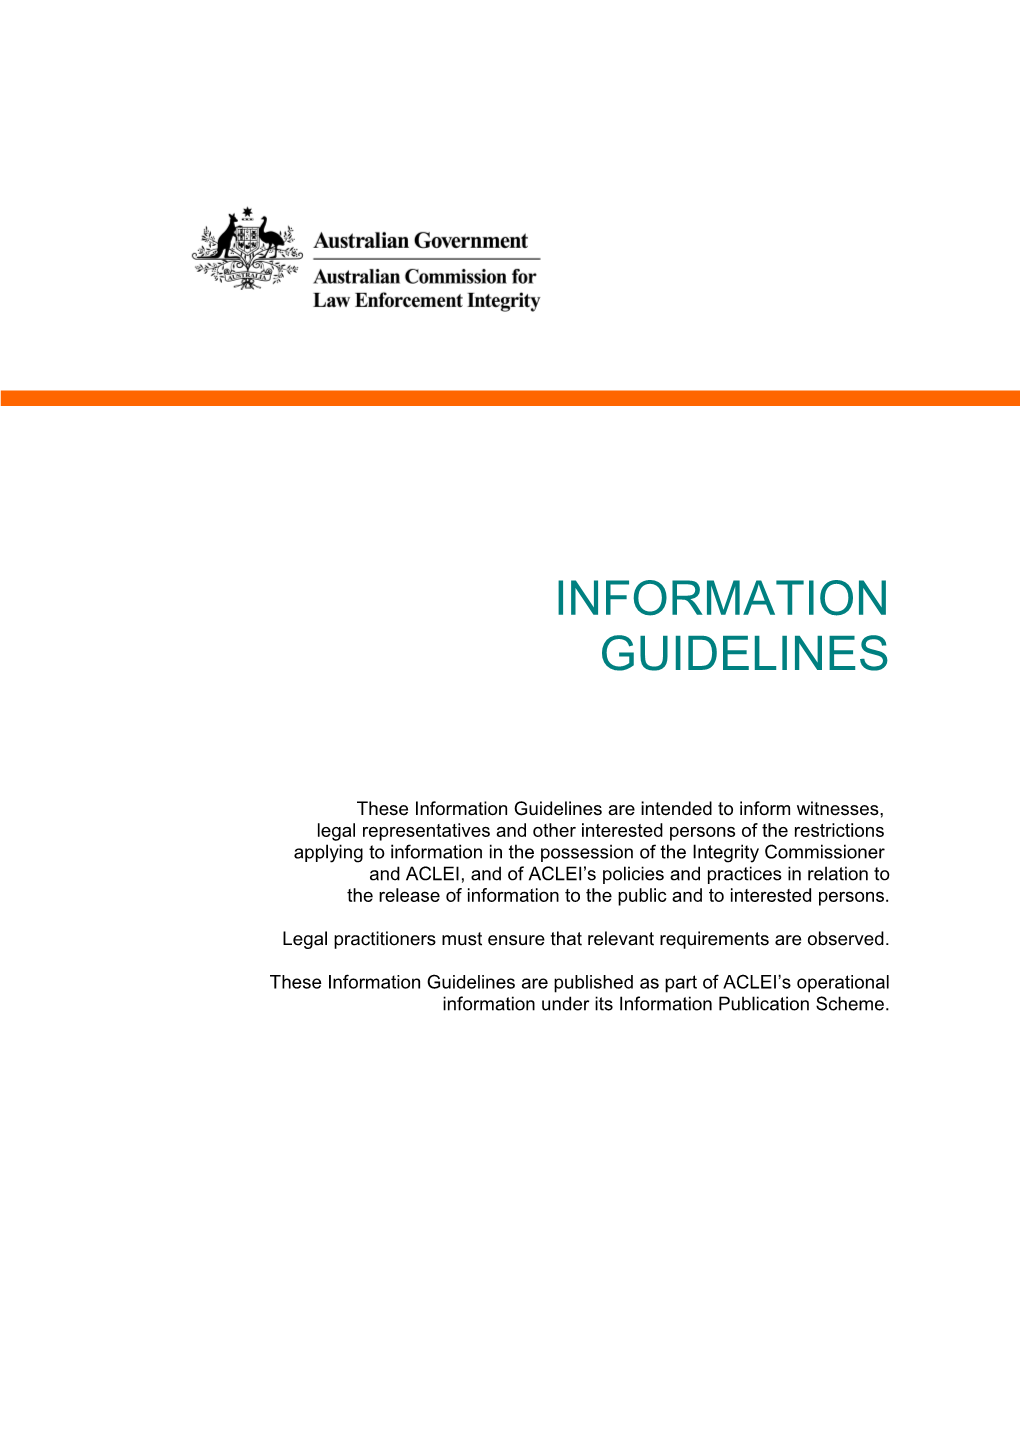 These Information Guidelines Are Intended to Inform Witnesses